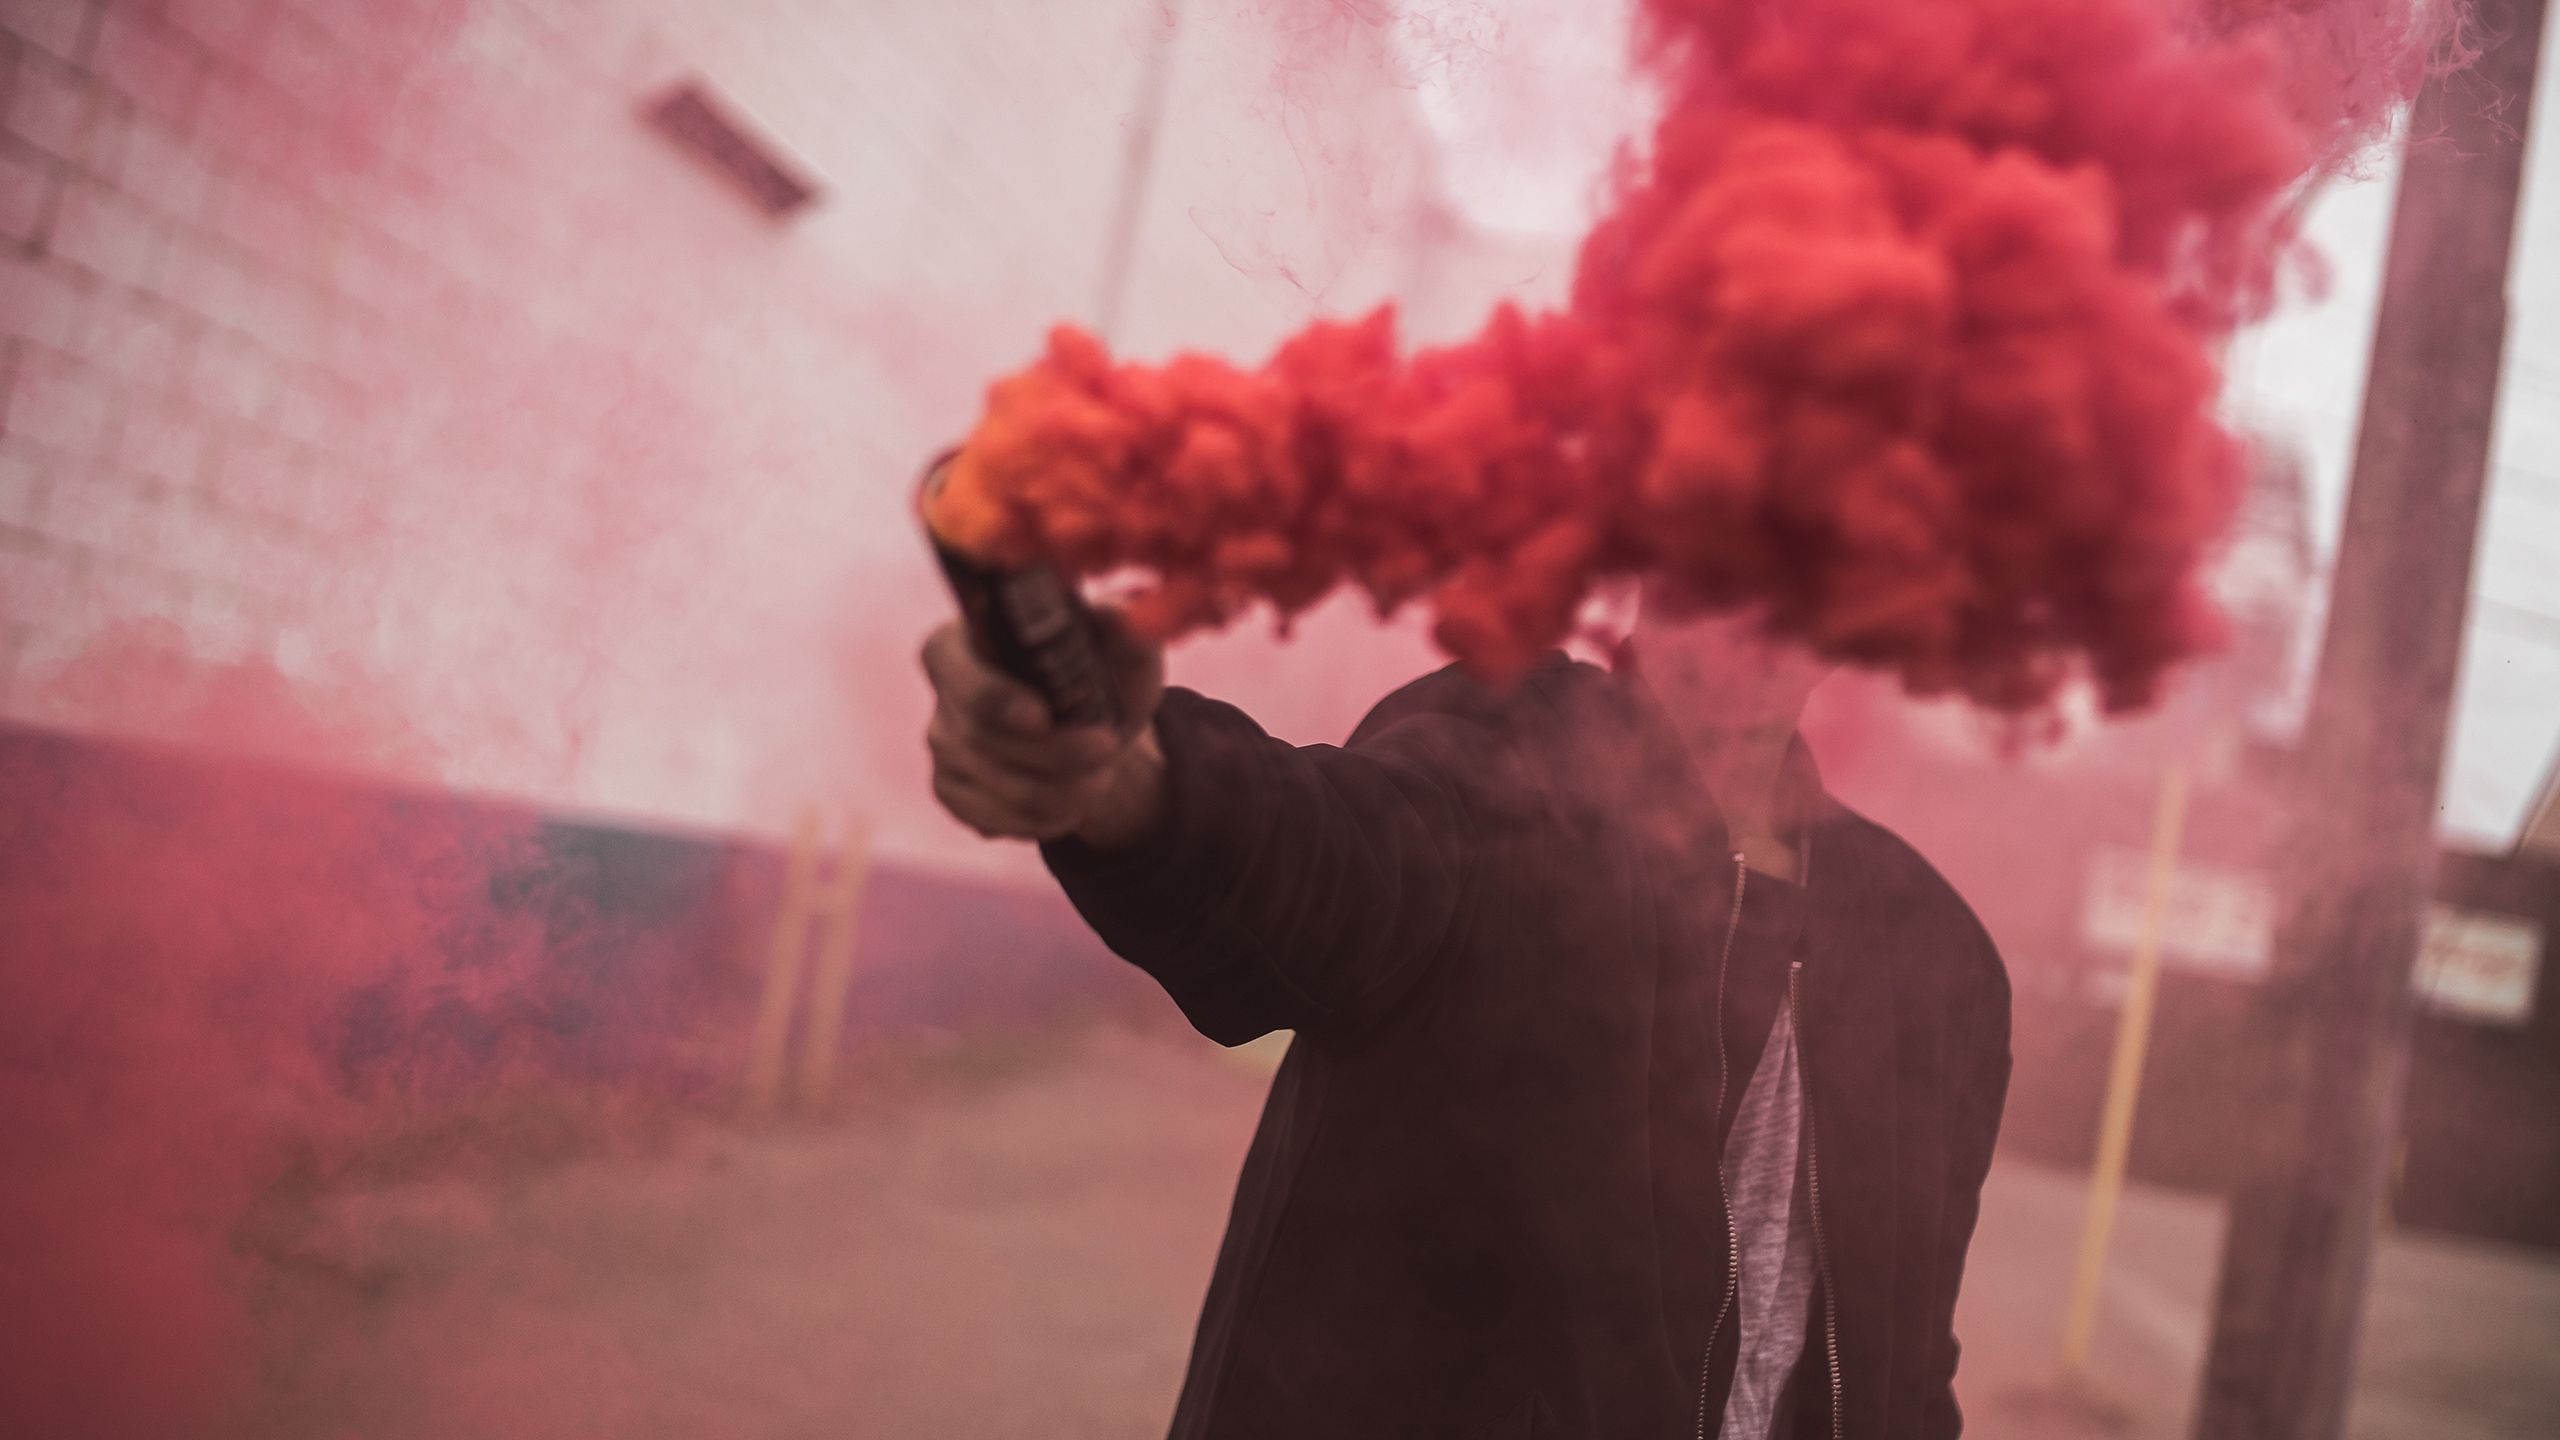 Red Smoke Photography Wallpaper Background 68645 2560x1440px